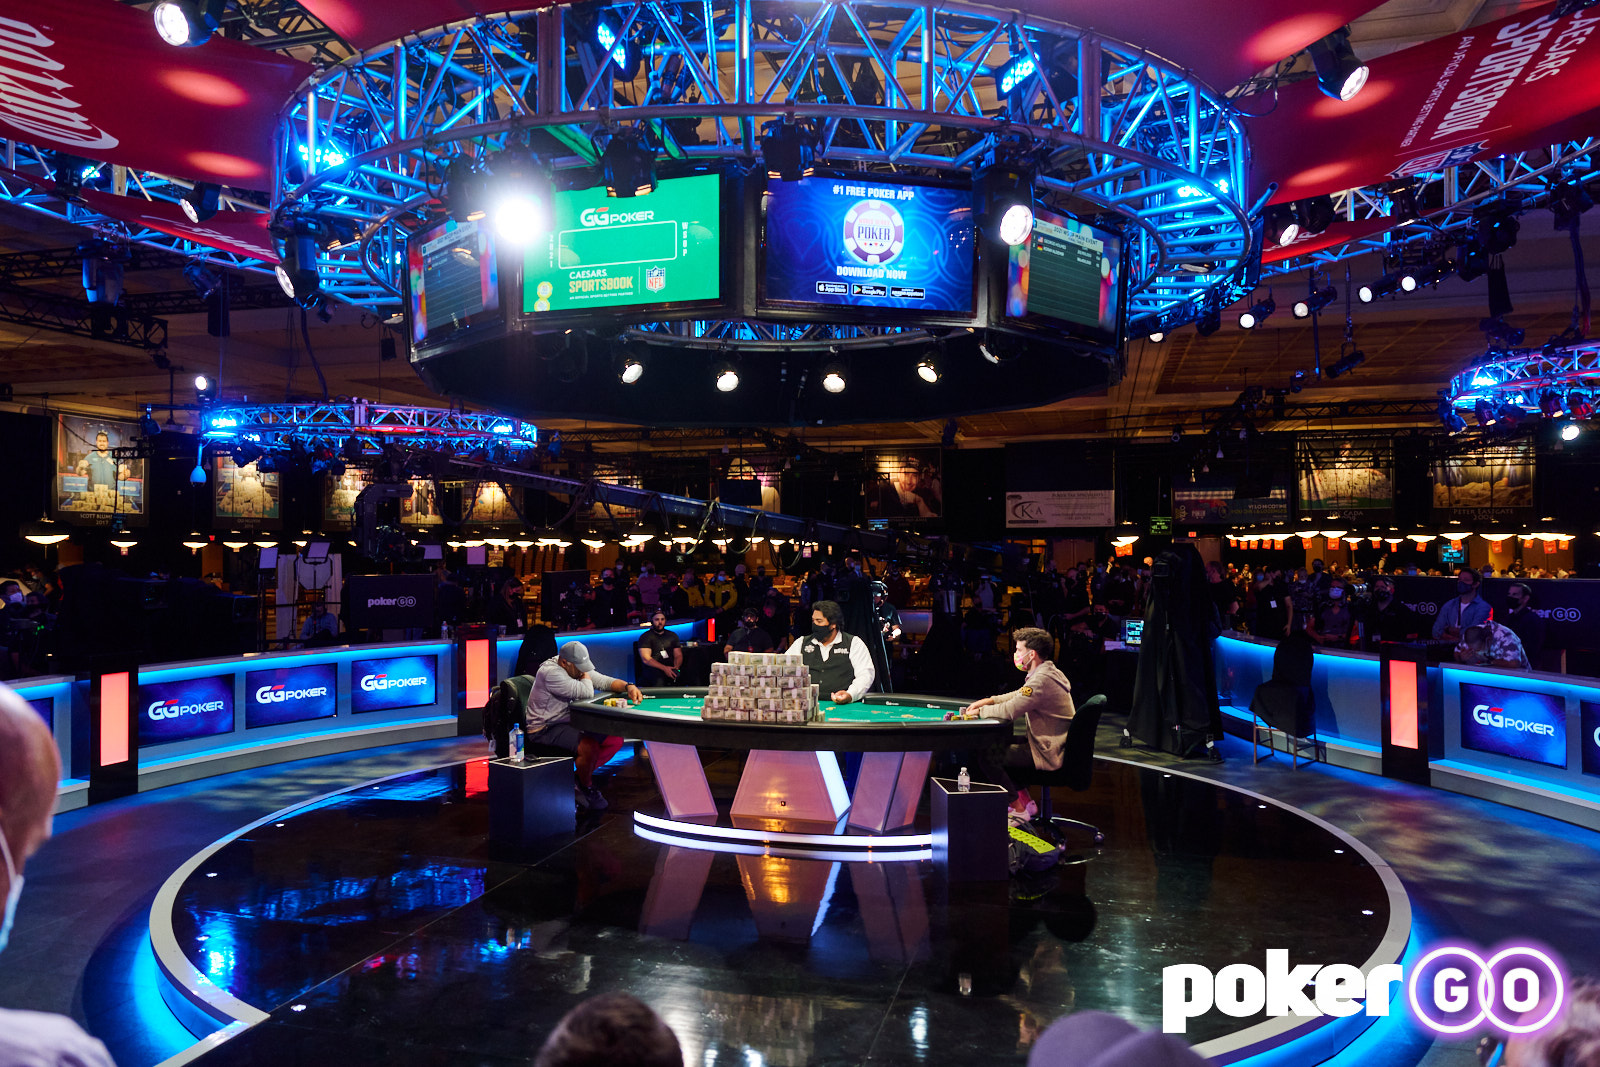 Watch The Riveting 8 Million Final Hand Of The 2021 WSOP Main Event